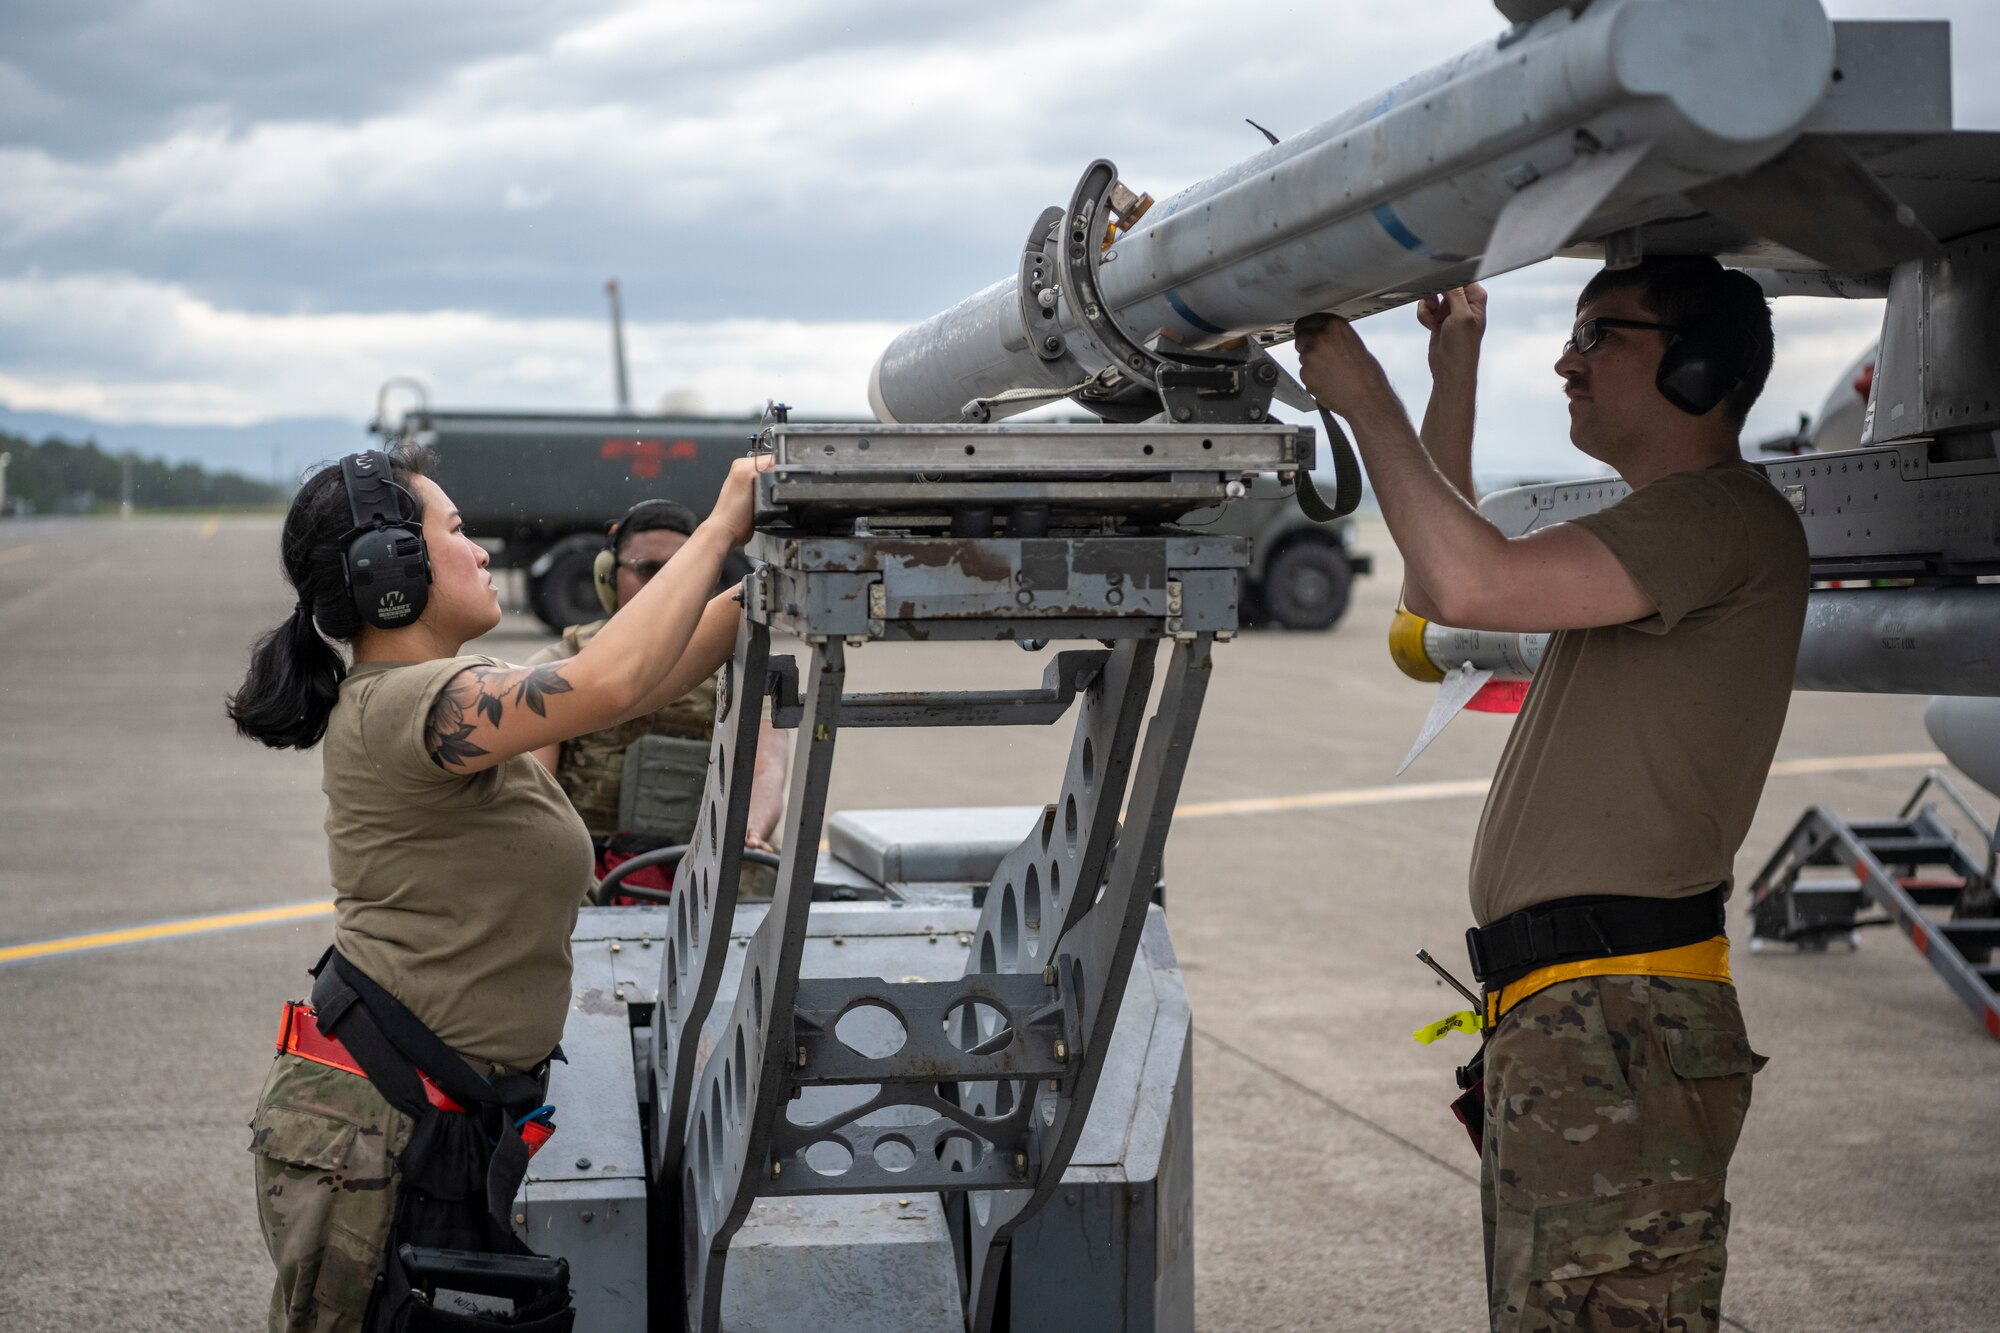 Airmen attaching a training ordnance onto an fighter jet on the flight line.